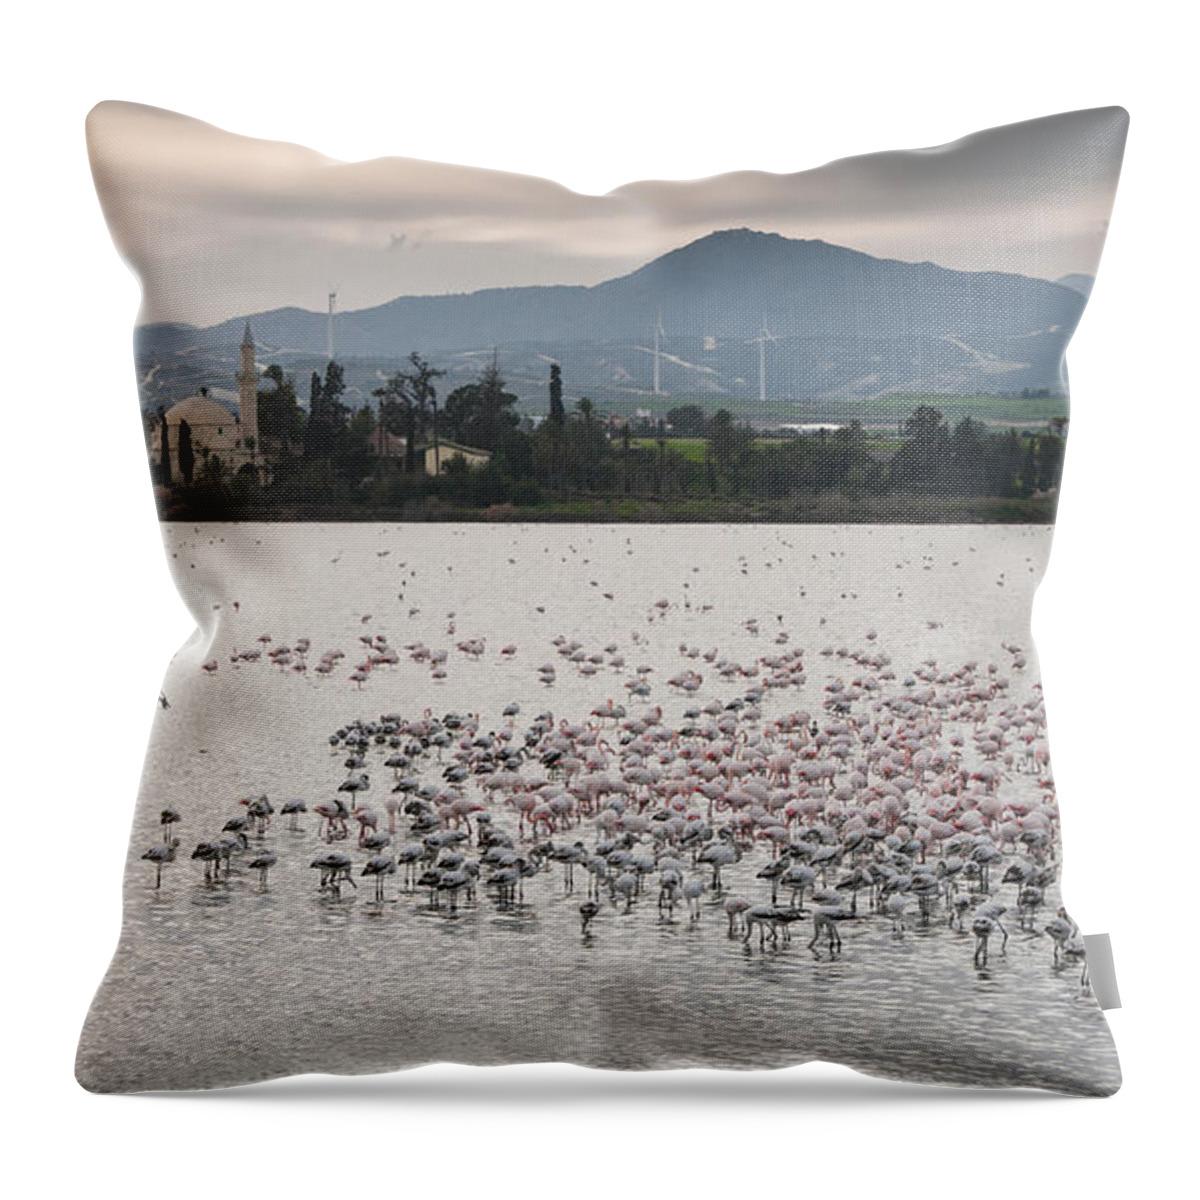 Flamingo Throw Pillow featuring the photograph Flamingo Birds #4 by Michalakis Ppalis